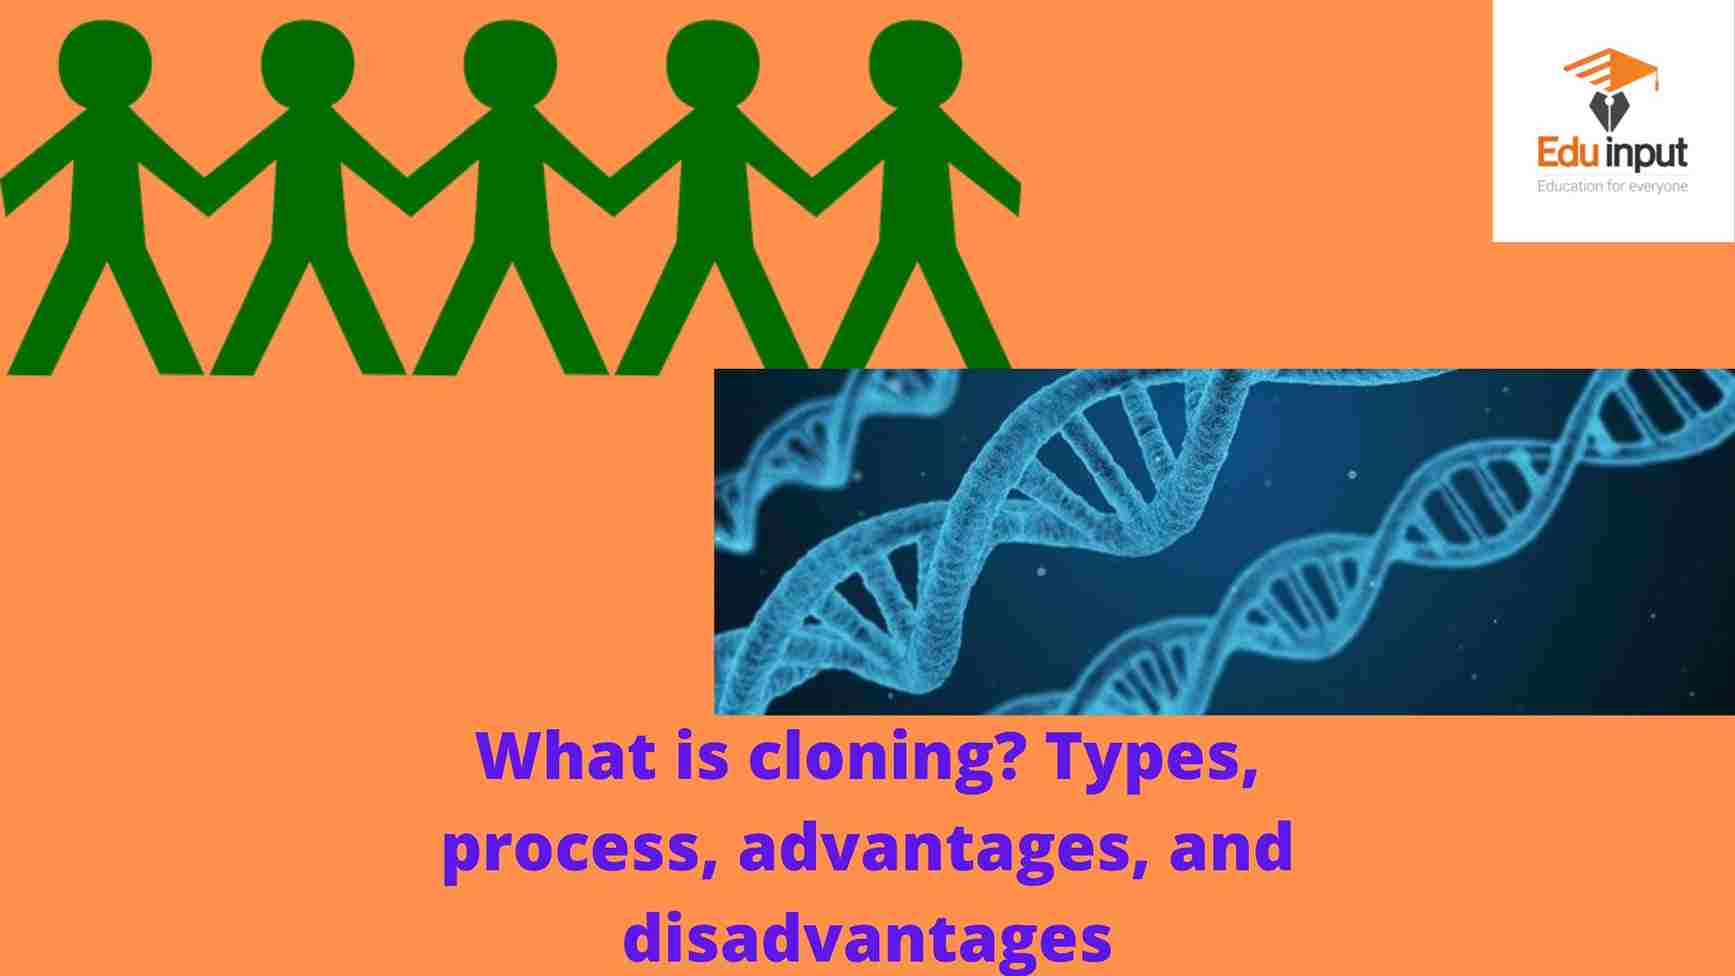 What is cloning? Types, process, advantages, and disadvantages